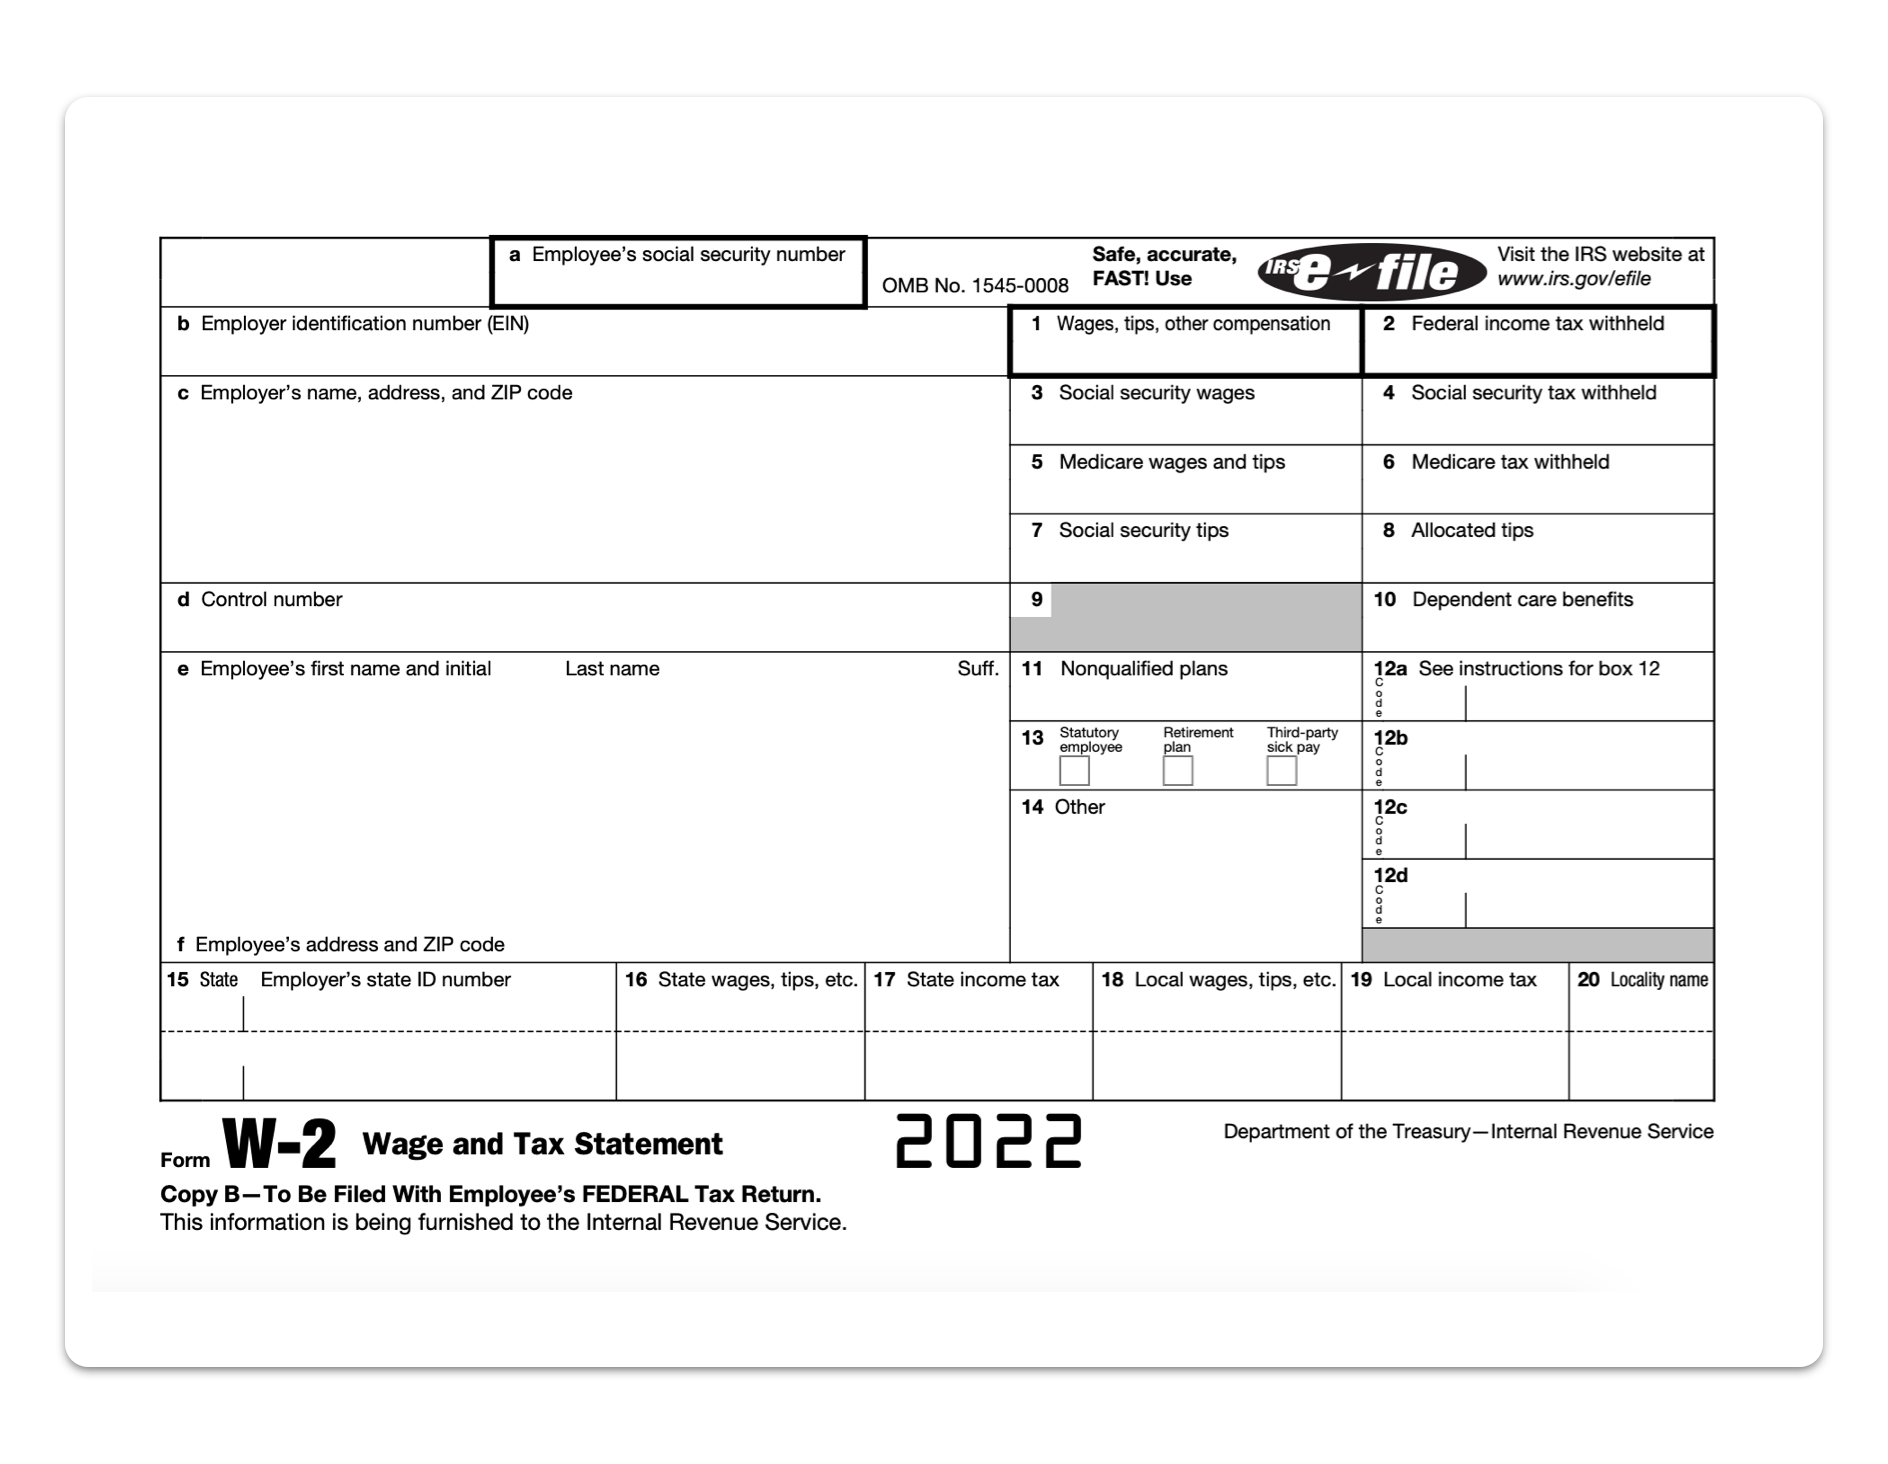 Your Guide To The W-2 Form: Wage And Tax Statement - Hourly, Inc. inside W2 Form For Independent Contractors